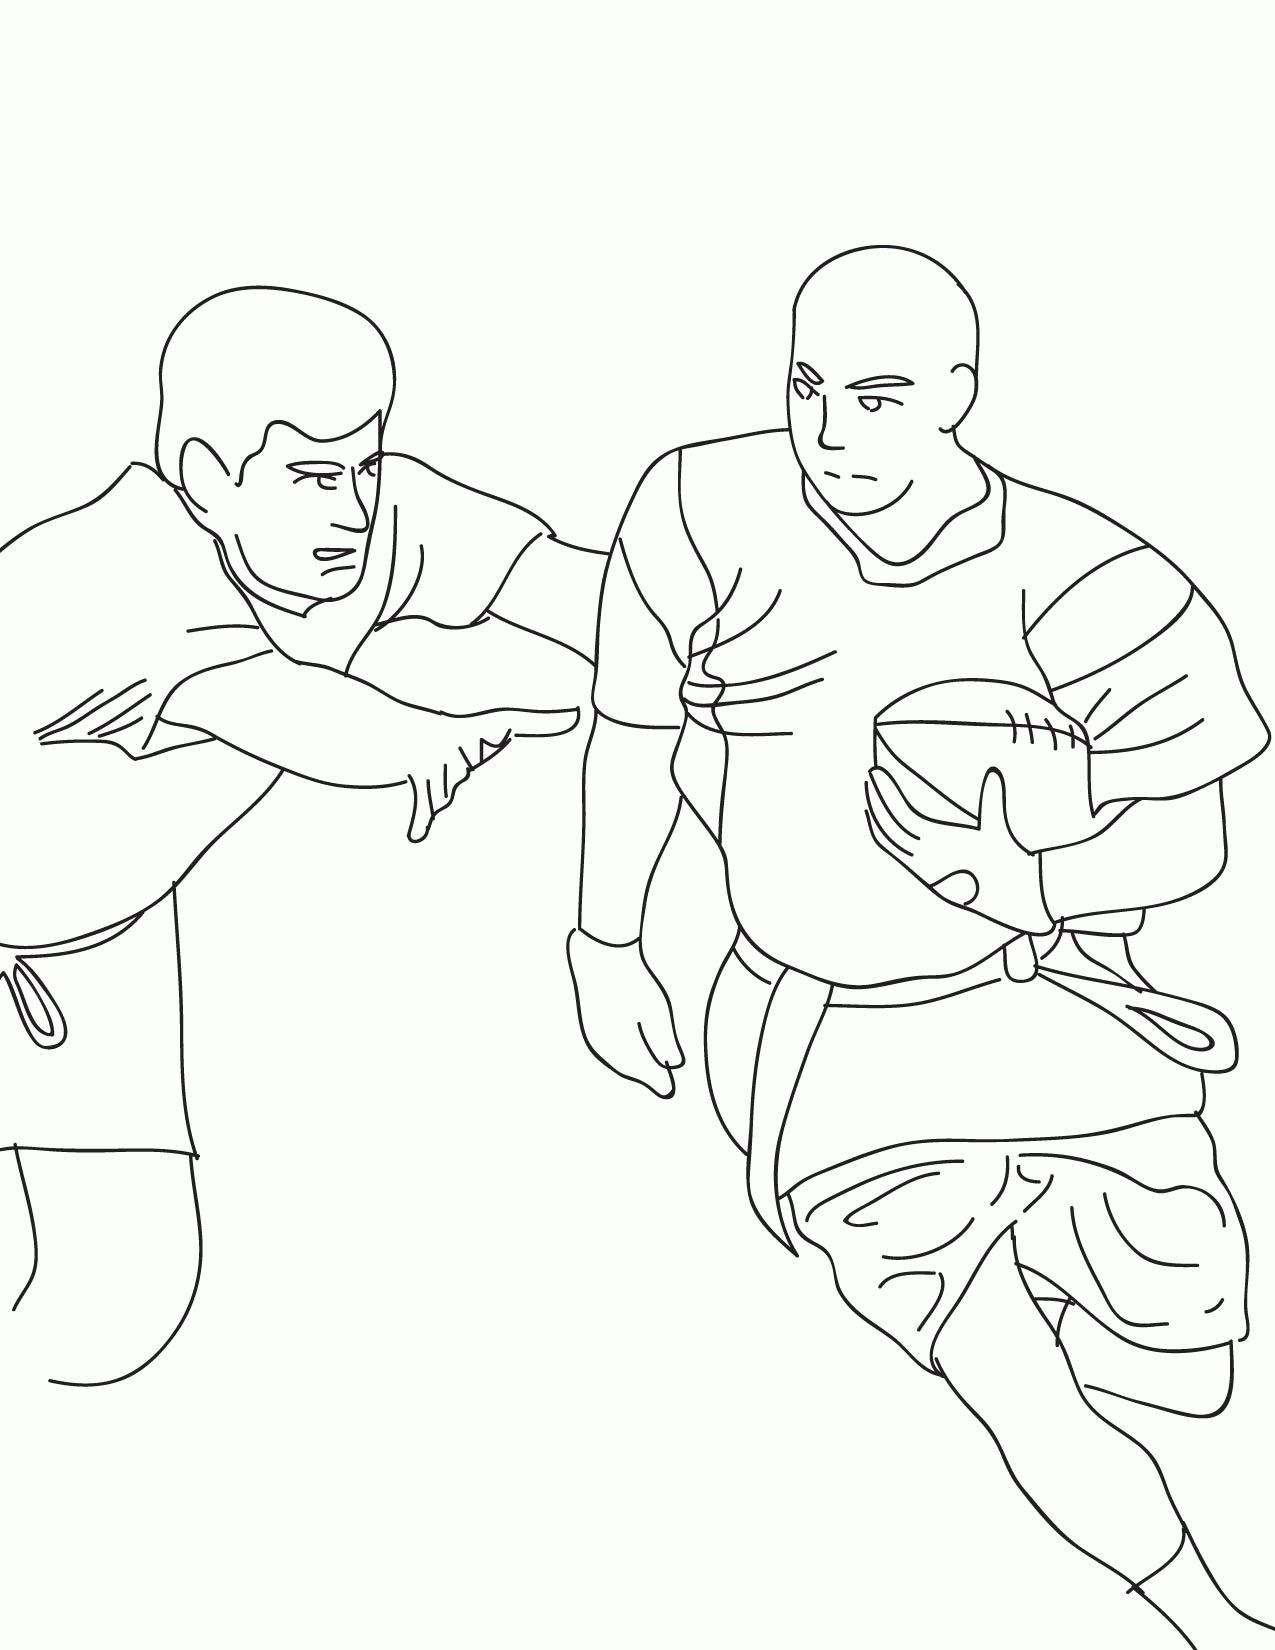 Flag Football Coloring Page - Handipoints